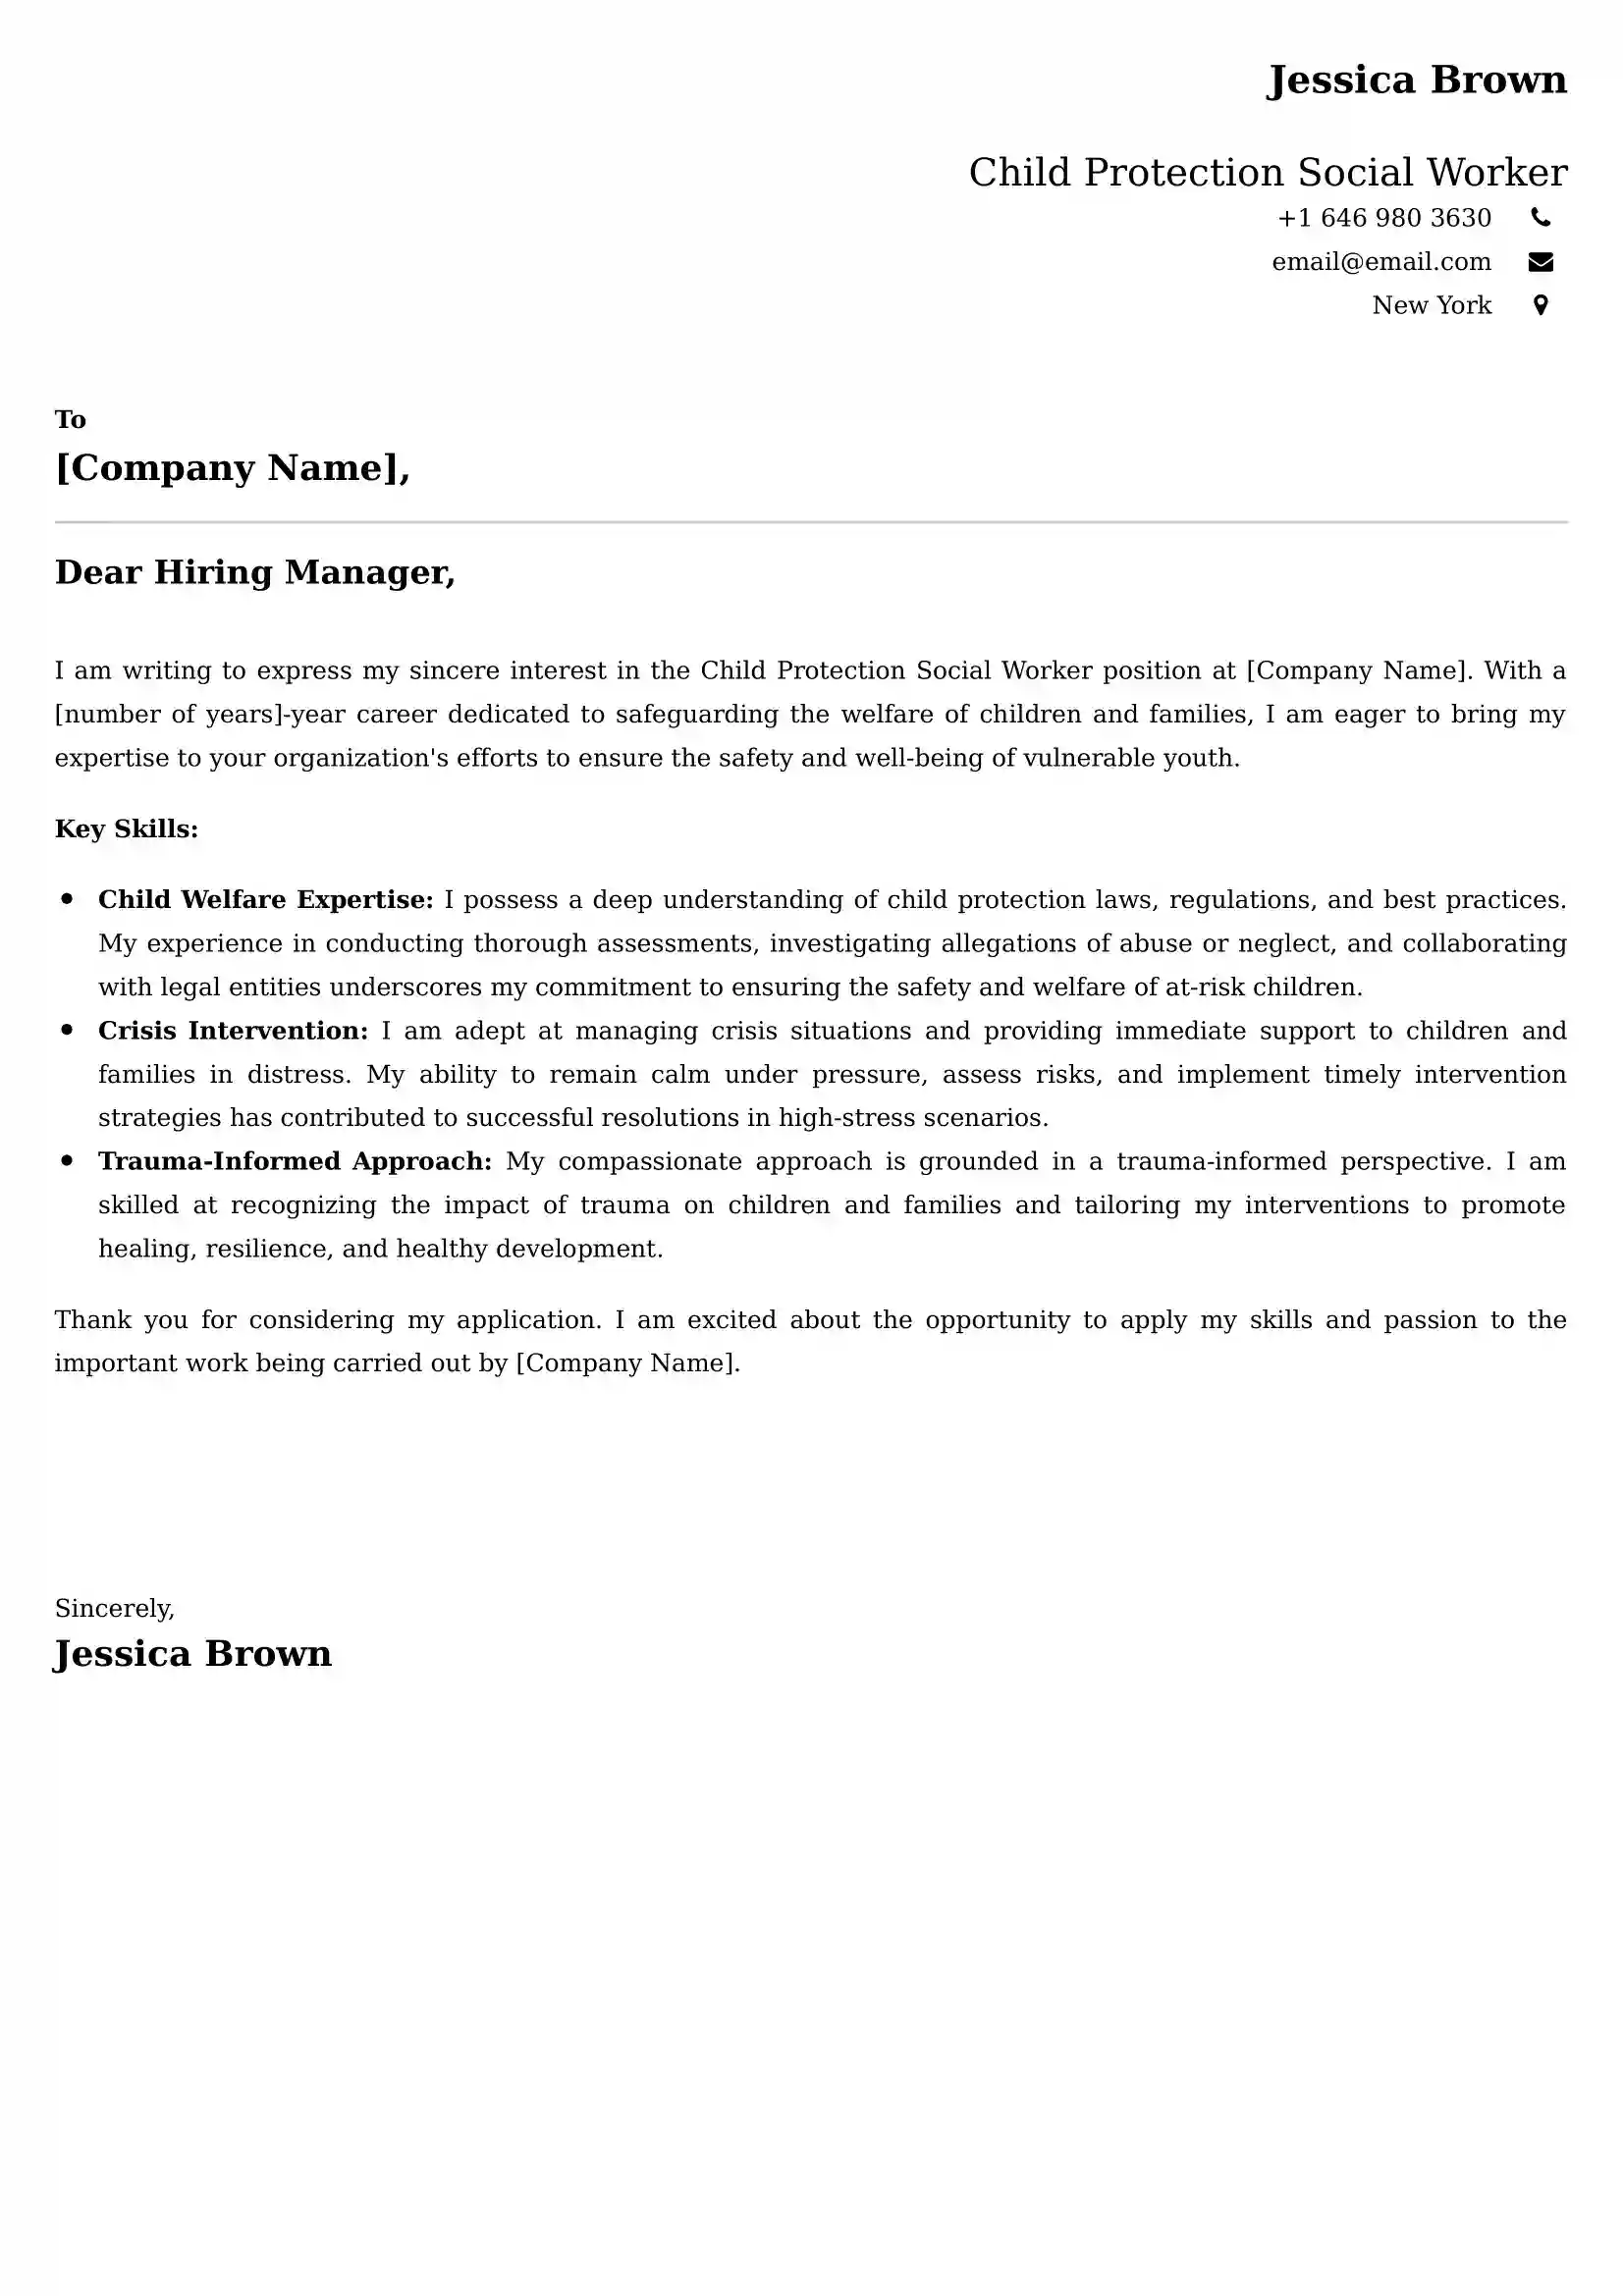 Child Protection Social Worker Cover Letter Examples -Latest Brazilian Templates